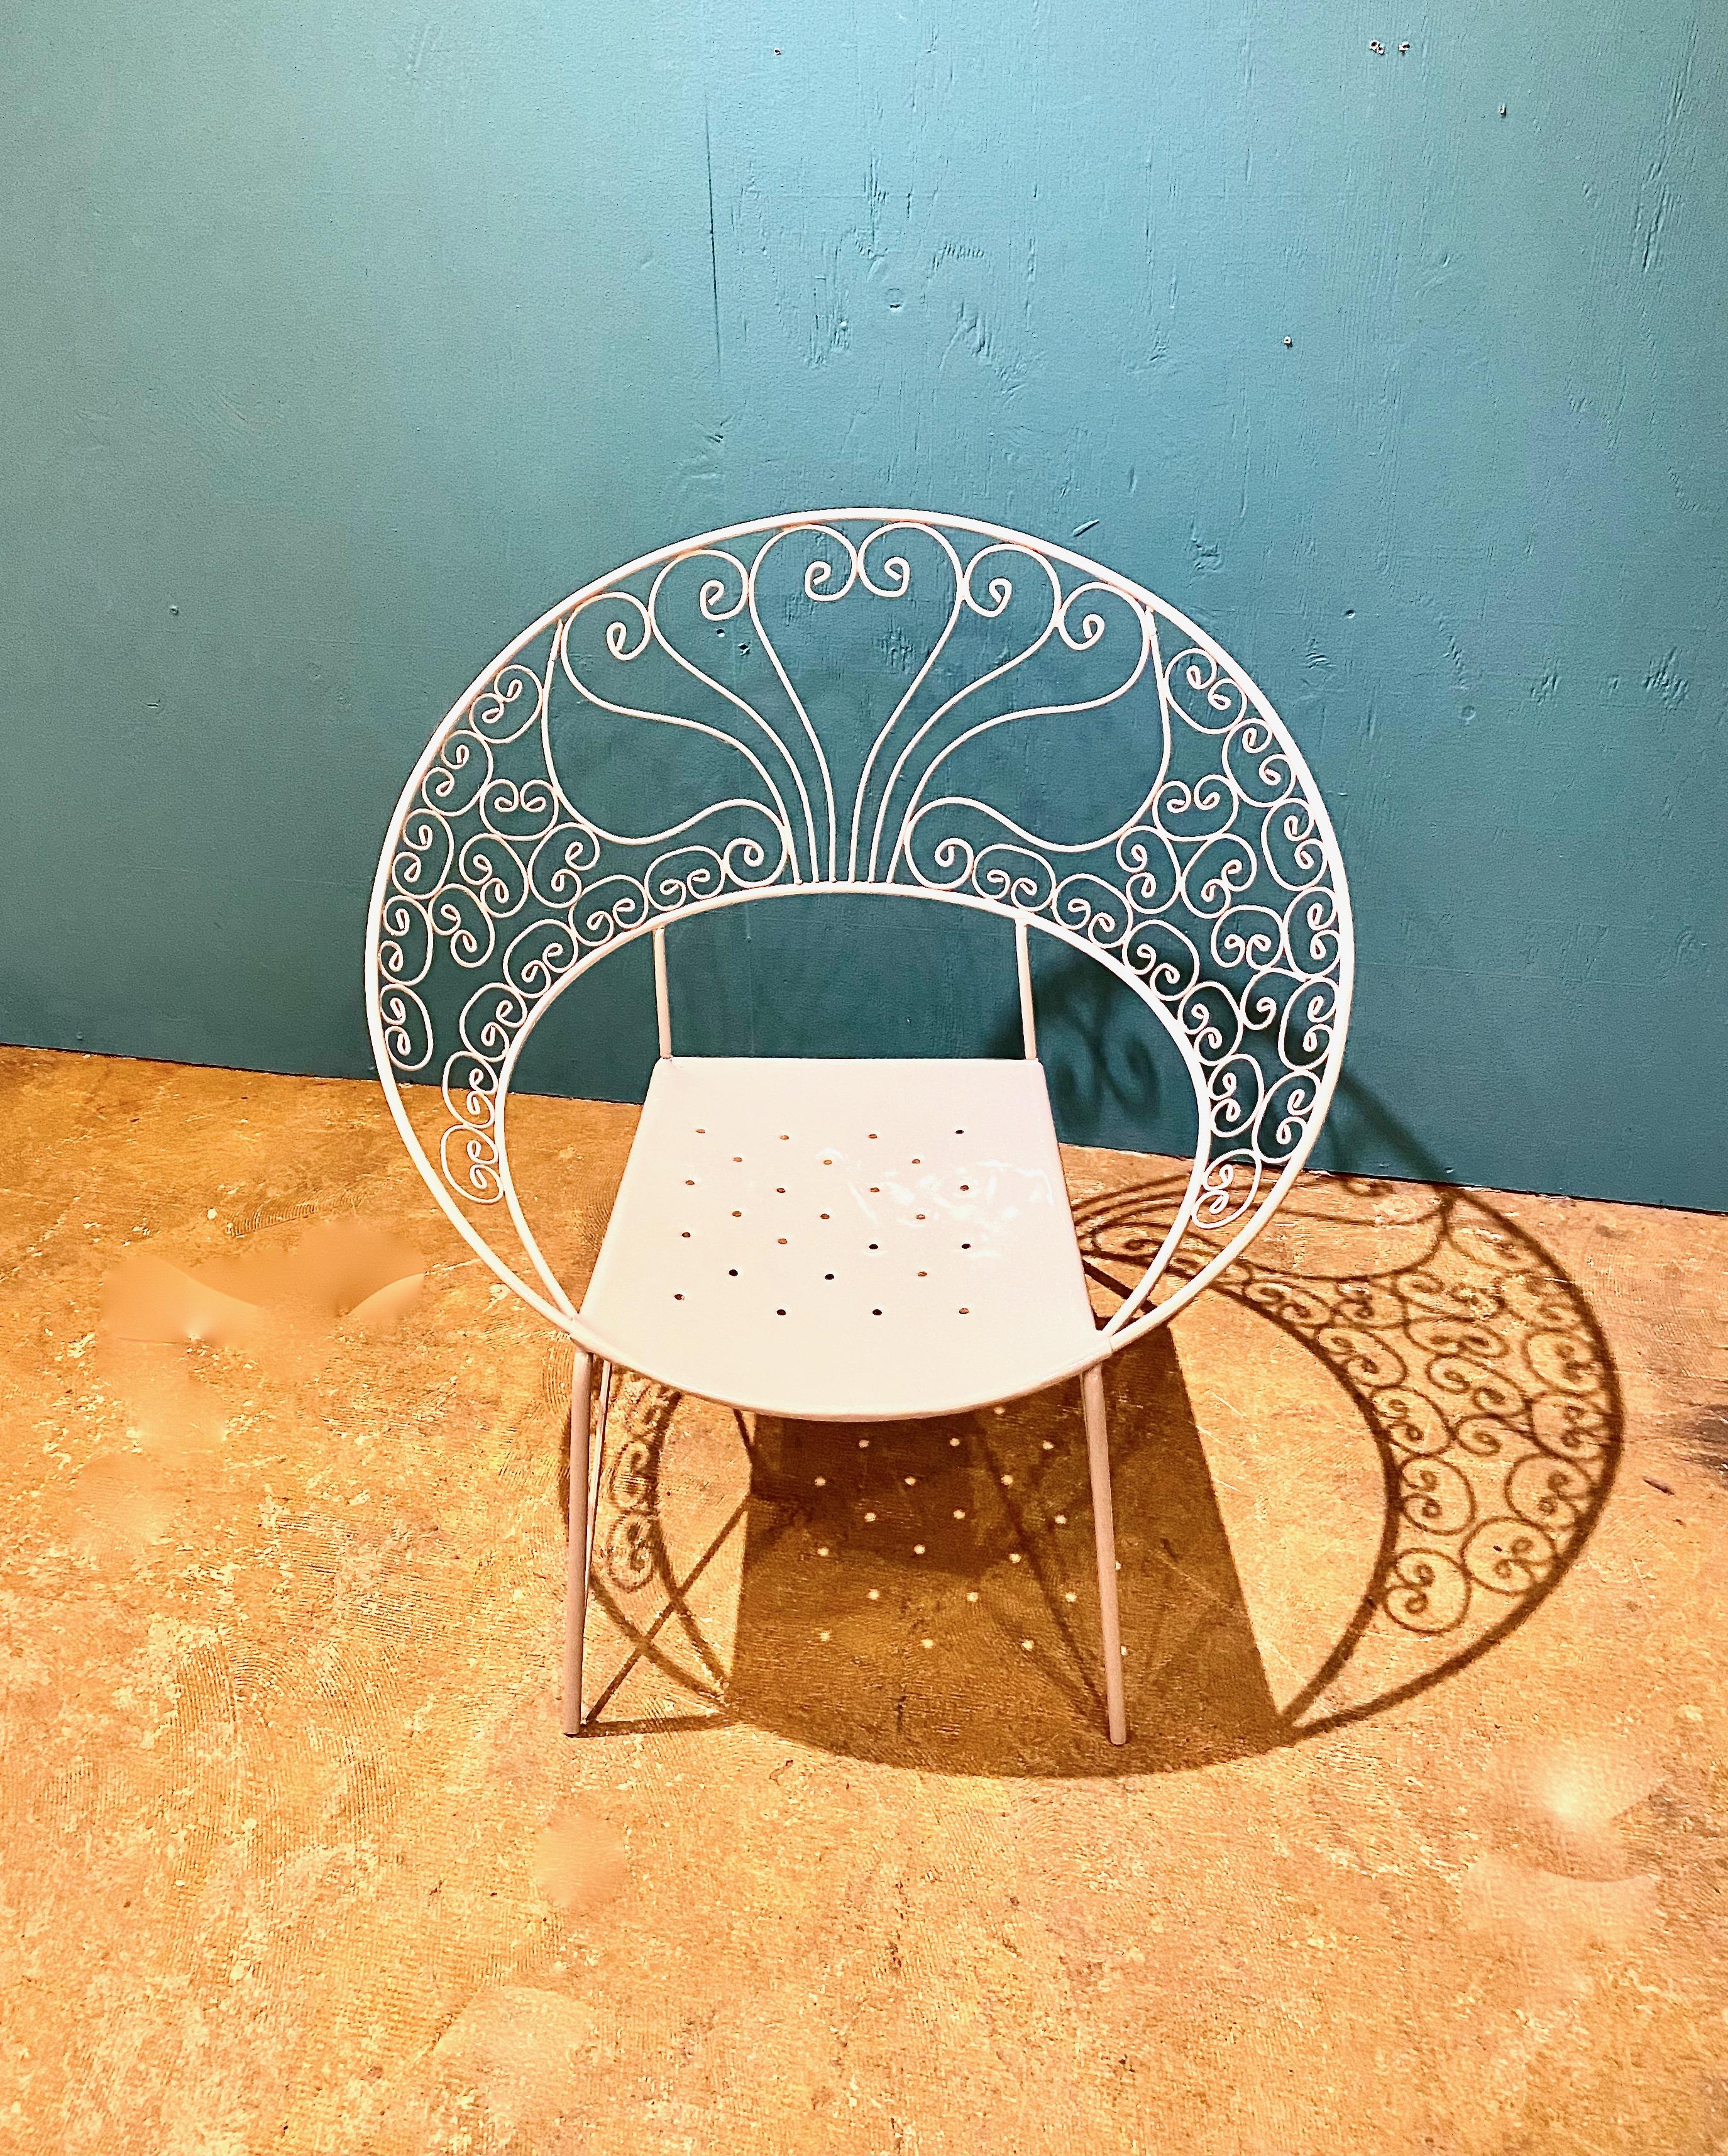 This is a striking suite of 4 chairs with a cocktail table en-suite that date to c. 1950s-1960s. The suite features clam shell shaped chairs decorated in scrolling wrought iron. The chairs and table are all in stable, very good condition and have